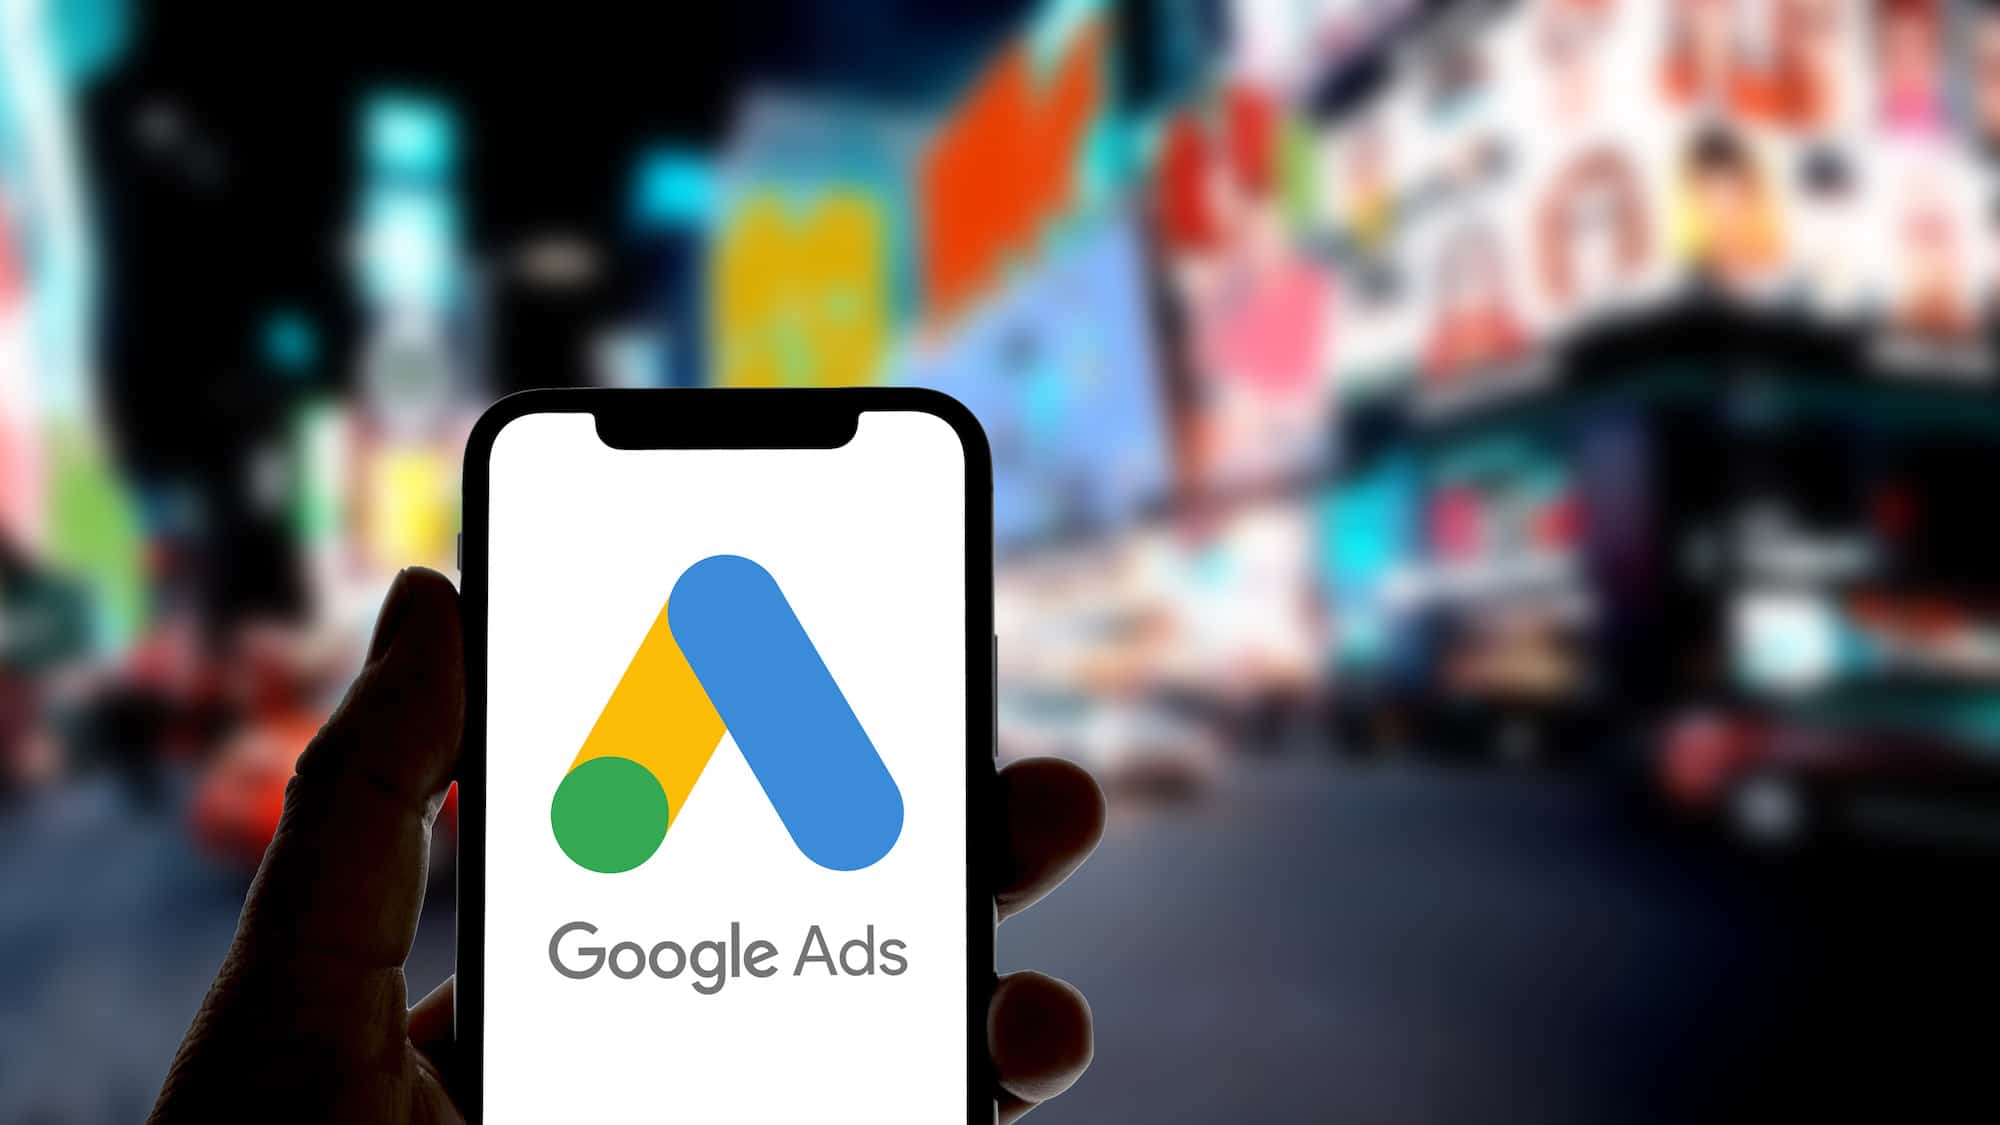 google ads can supercharge local service businesses